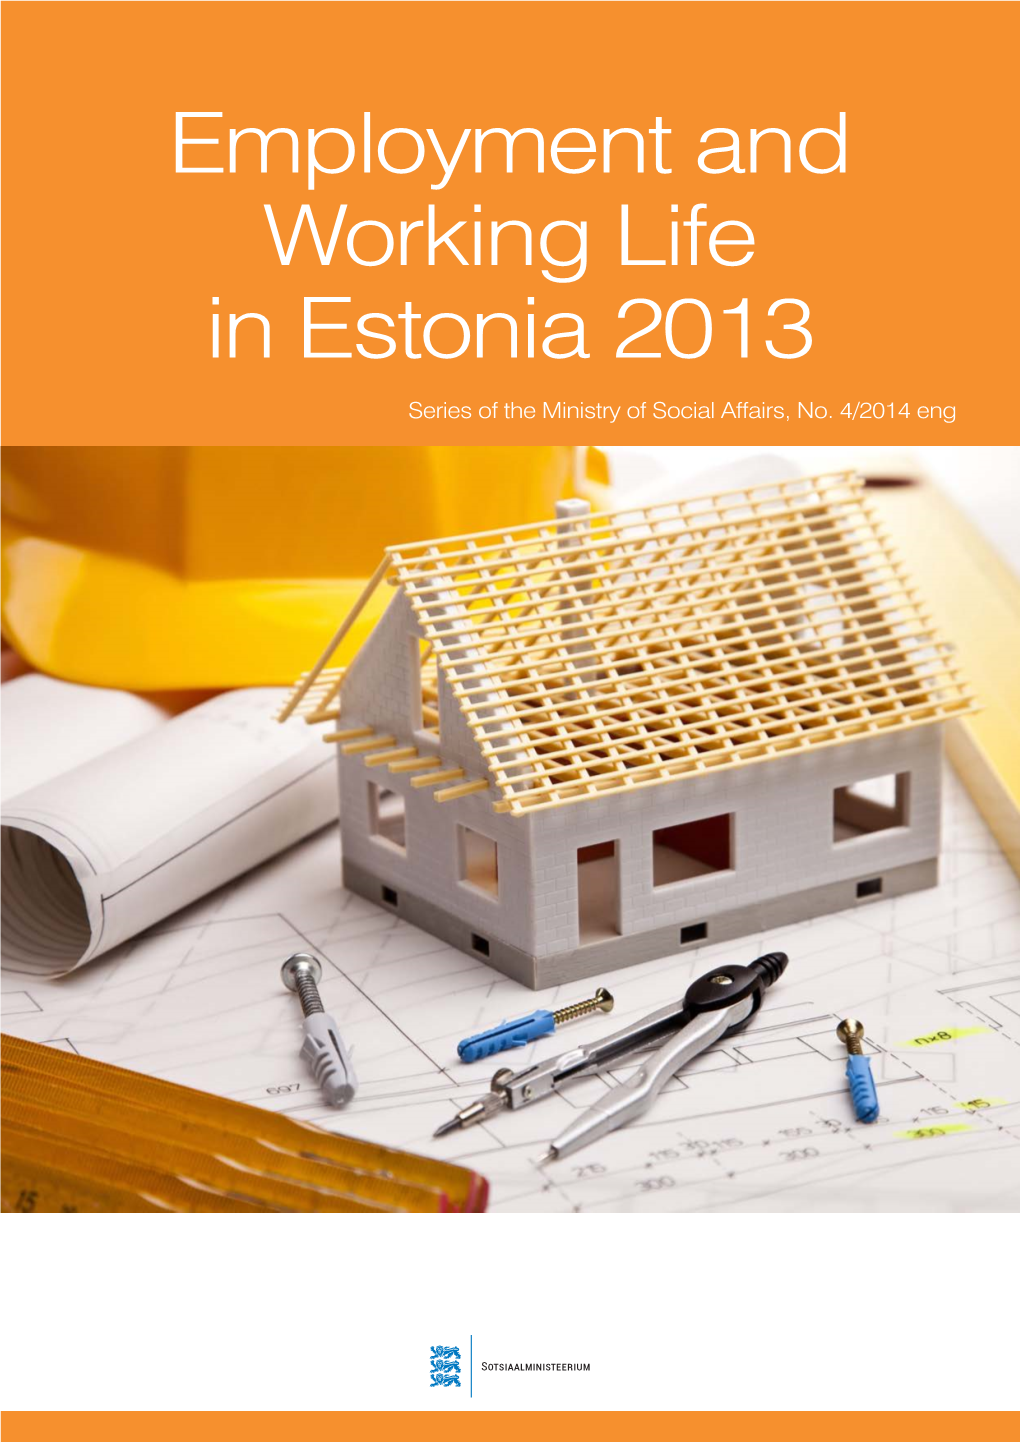 Employment and Working Life in Estonia 2013